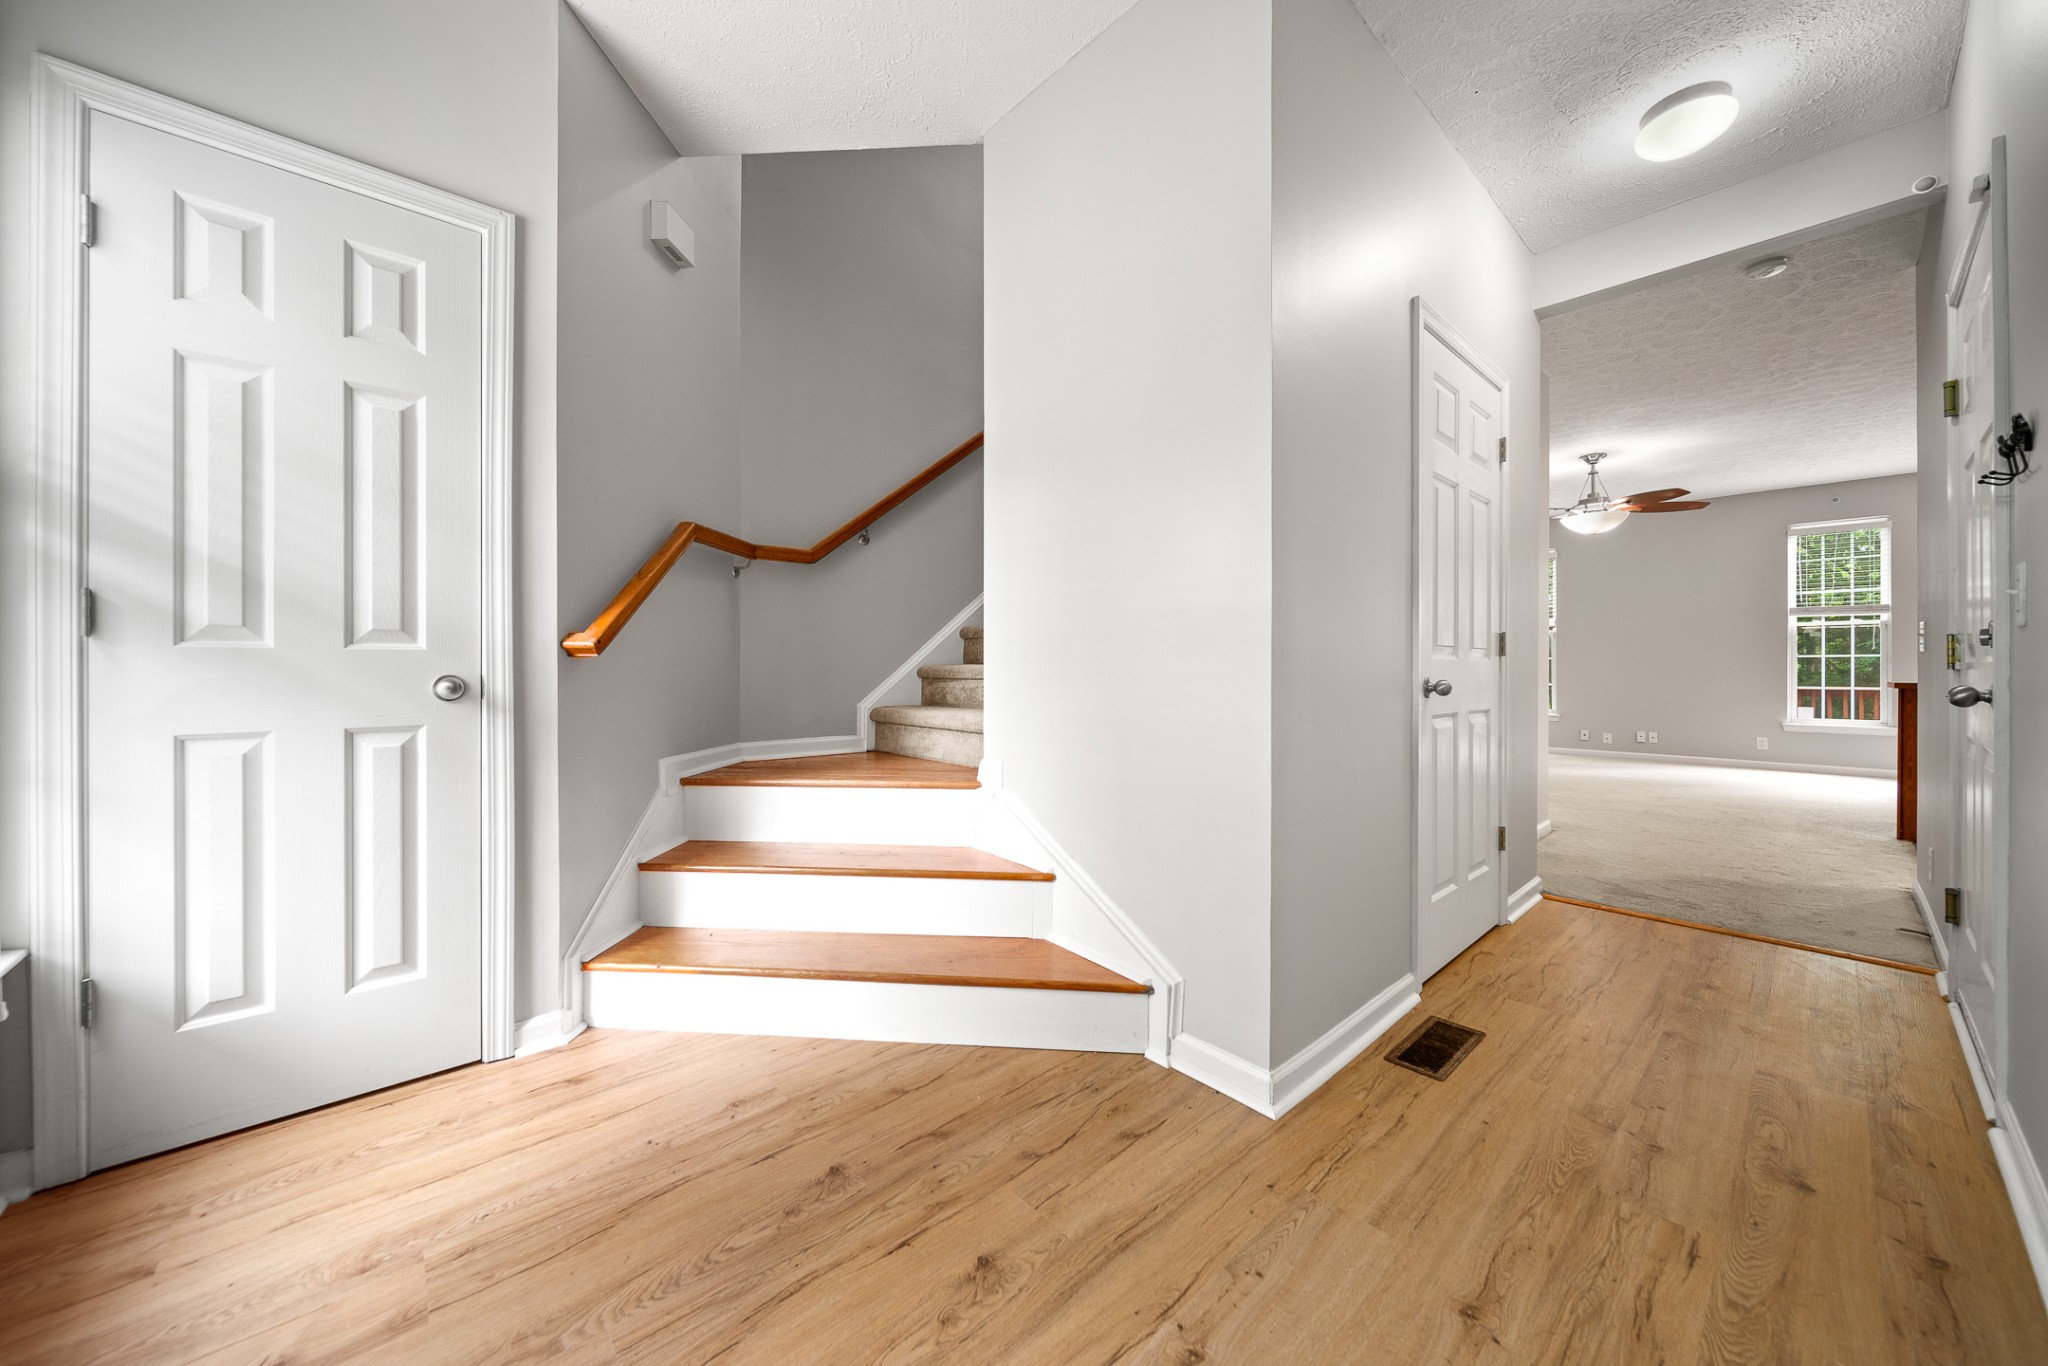 a view of a hallway with wooden floor and staircase